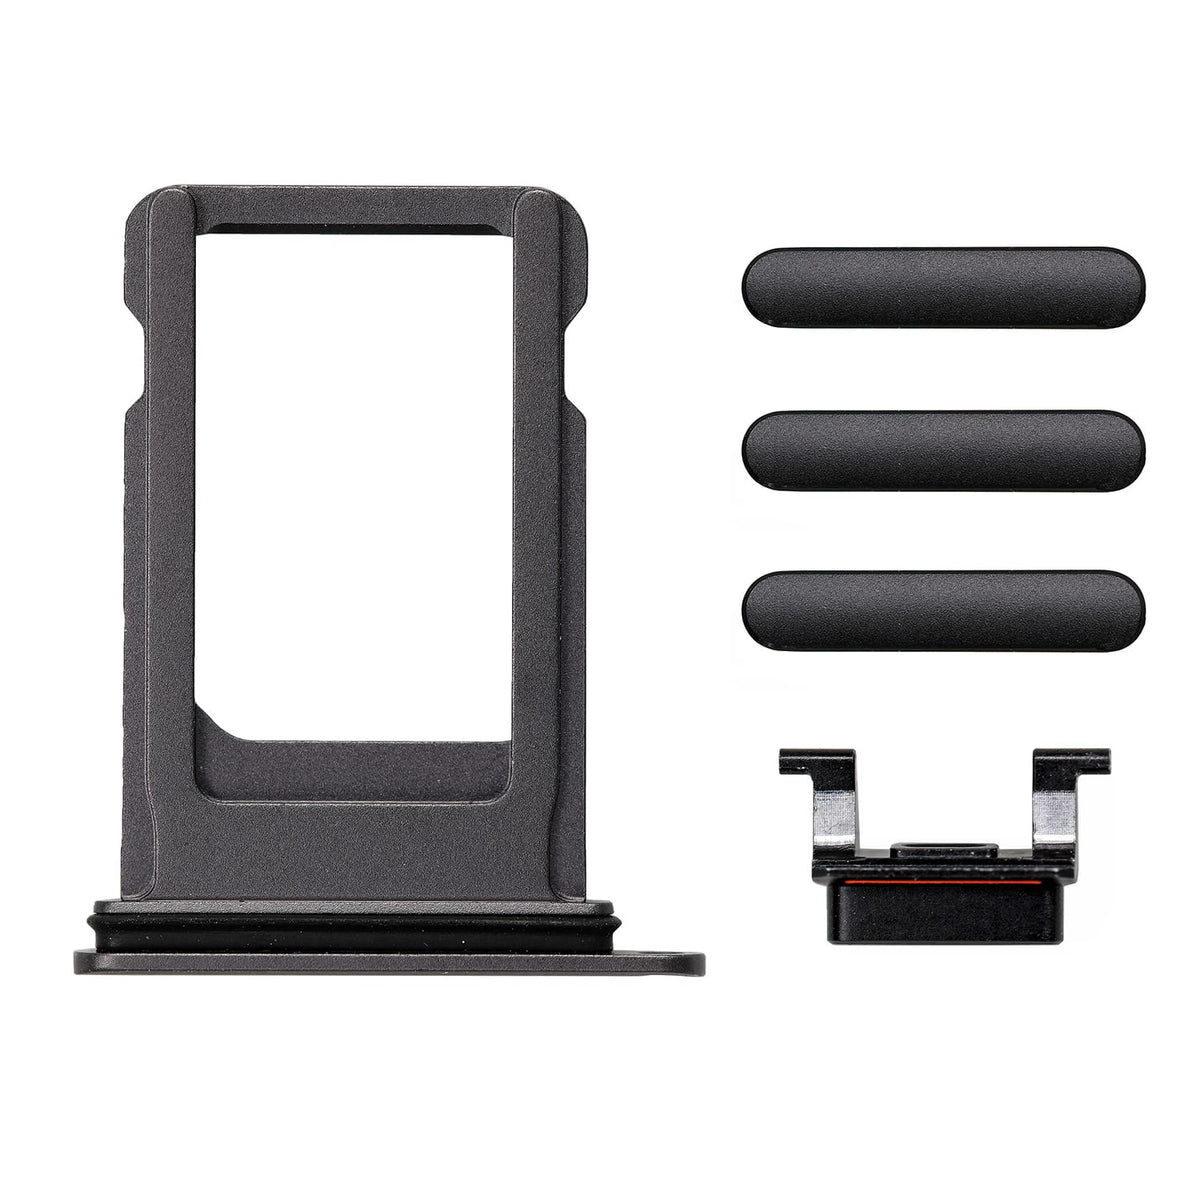 BLACK SIDE BUTTONS SET WITH SIM TRAY FOR IPHONE 8/SE 2ND/SE 3RD.